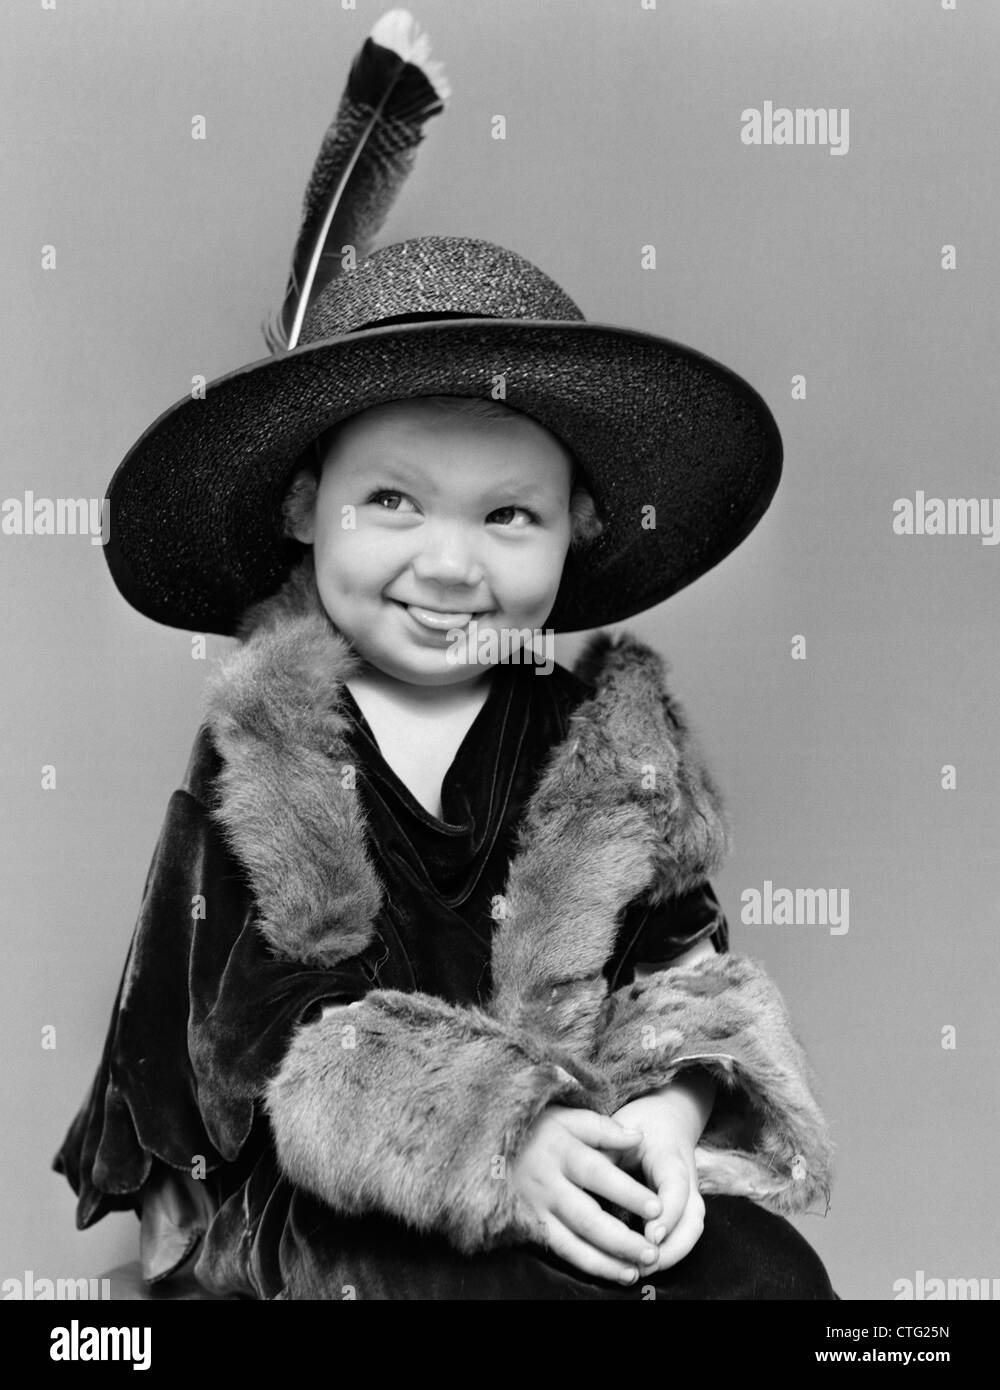 1940s GIRL IN OVERSIZED VELVET DRESS HAT & FURS WITH EYES CAST TO SIDE & TONGUE STICKING PARTIALLY OUT Stock Photo